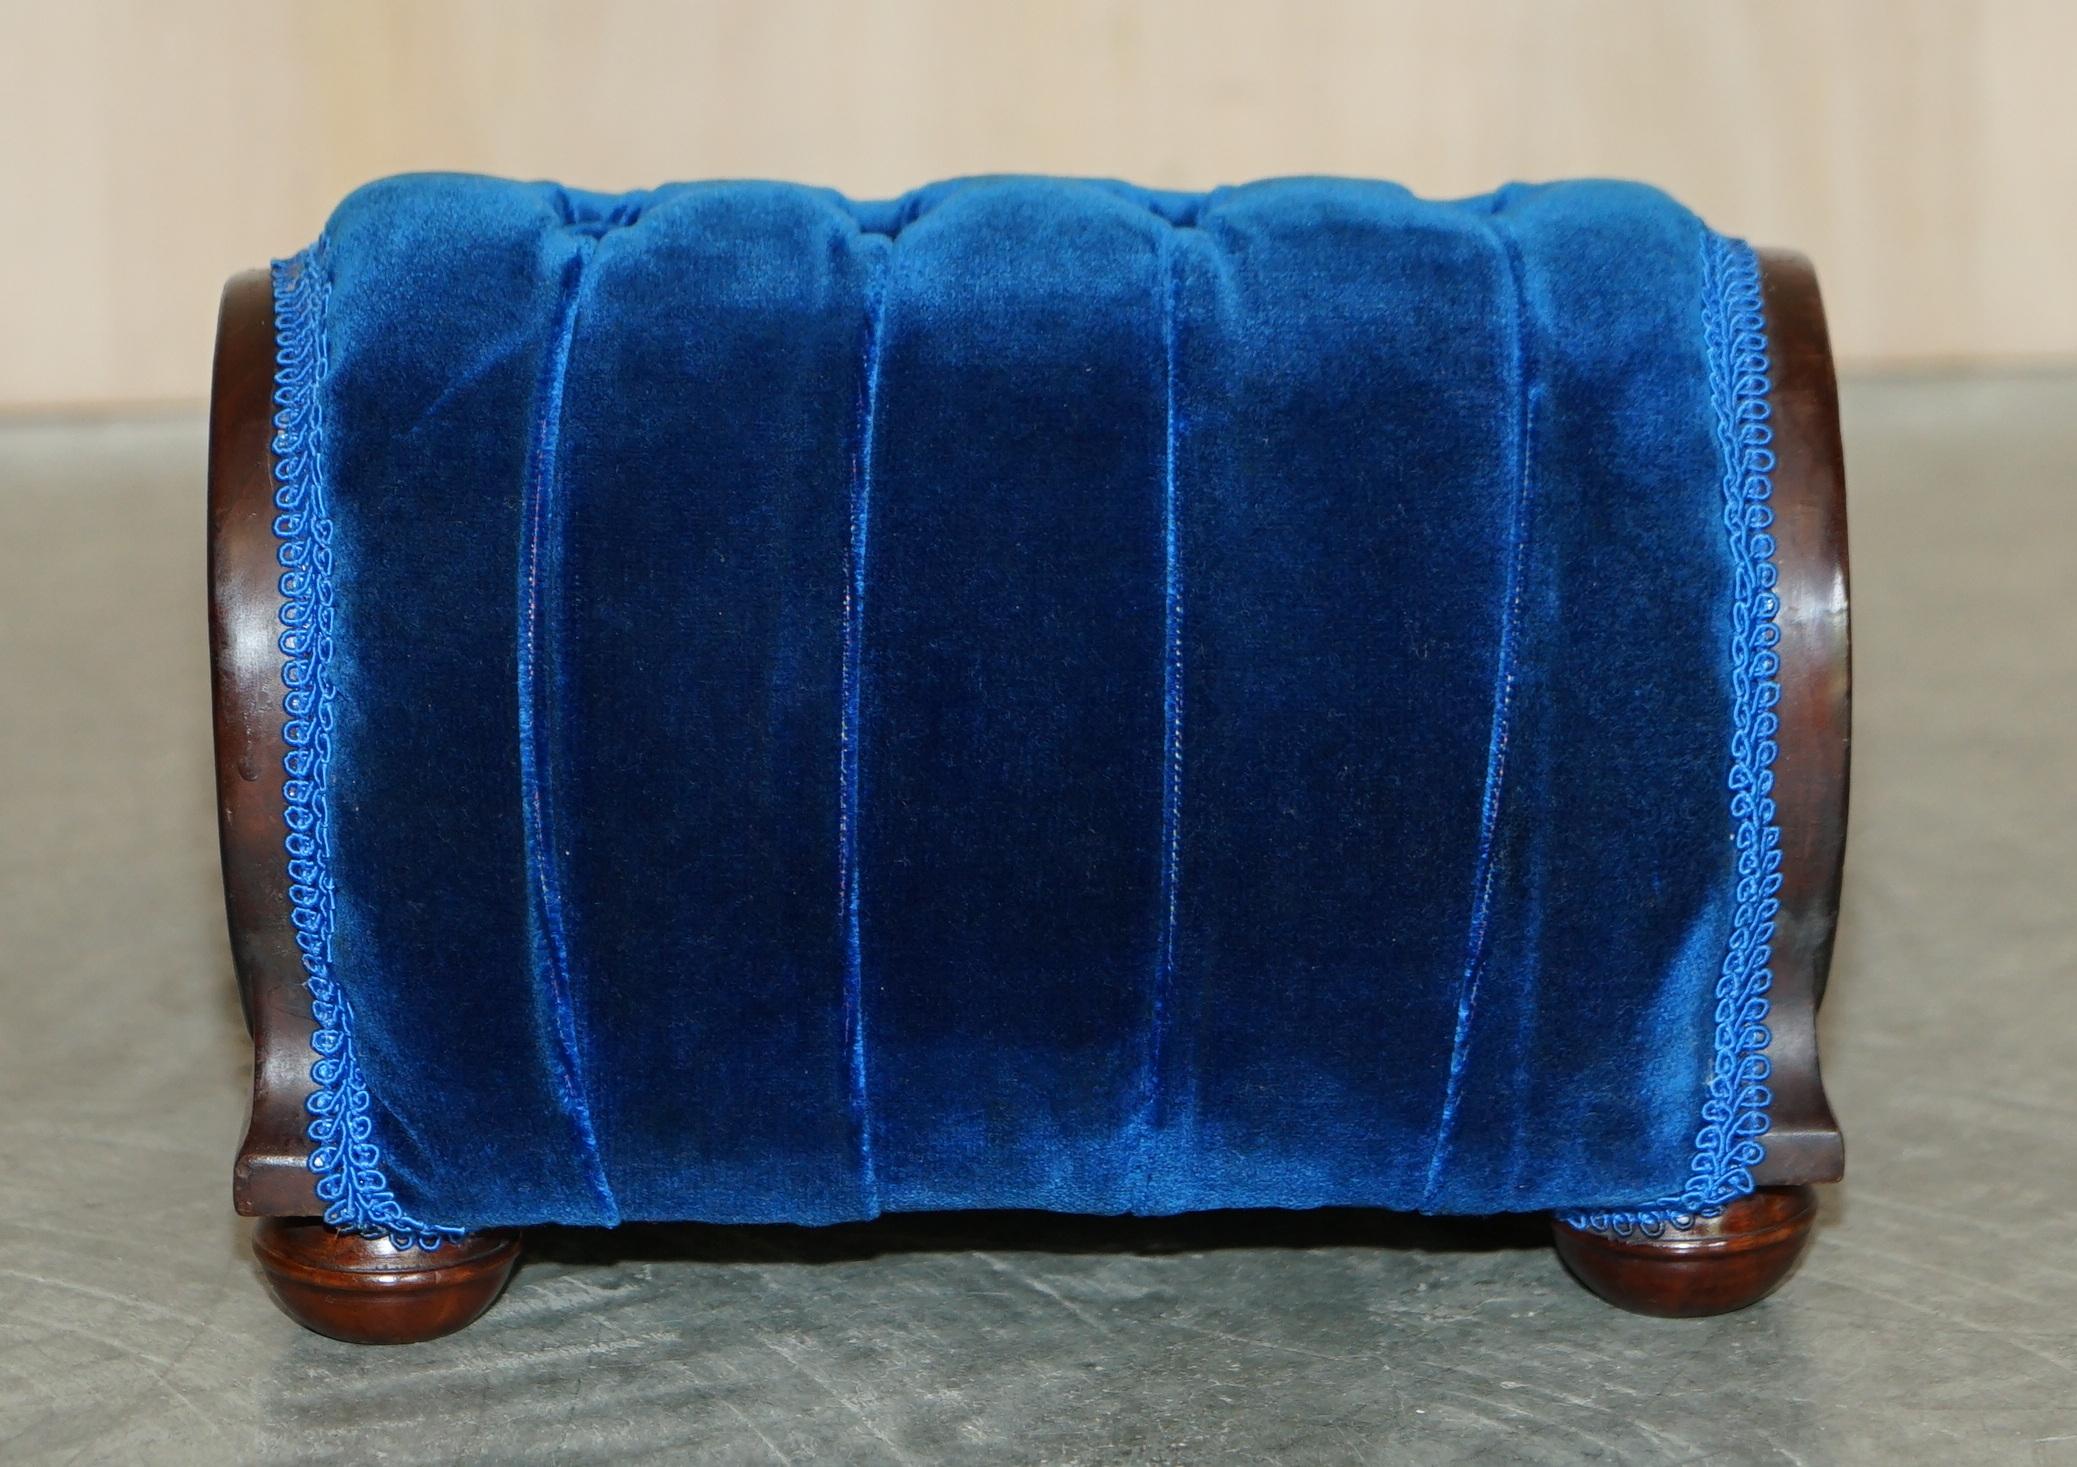 PAIR OF REGENCY BLUE ANTIQUE ViCTORIAN CHESTERFIELD TUFTED CURVED FOOTSTOOLS 6